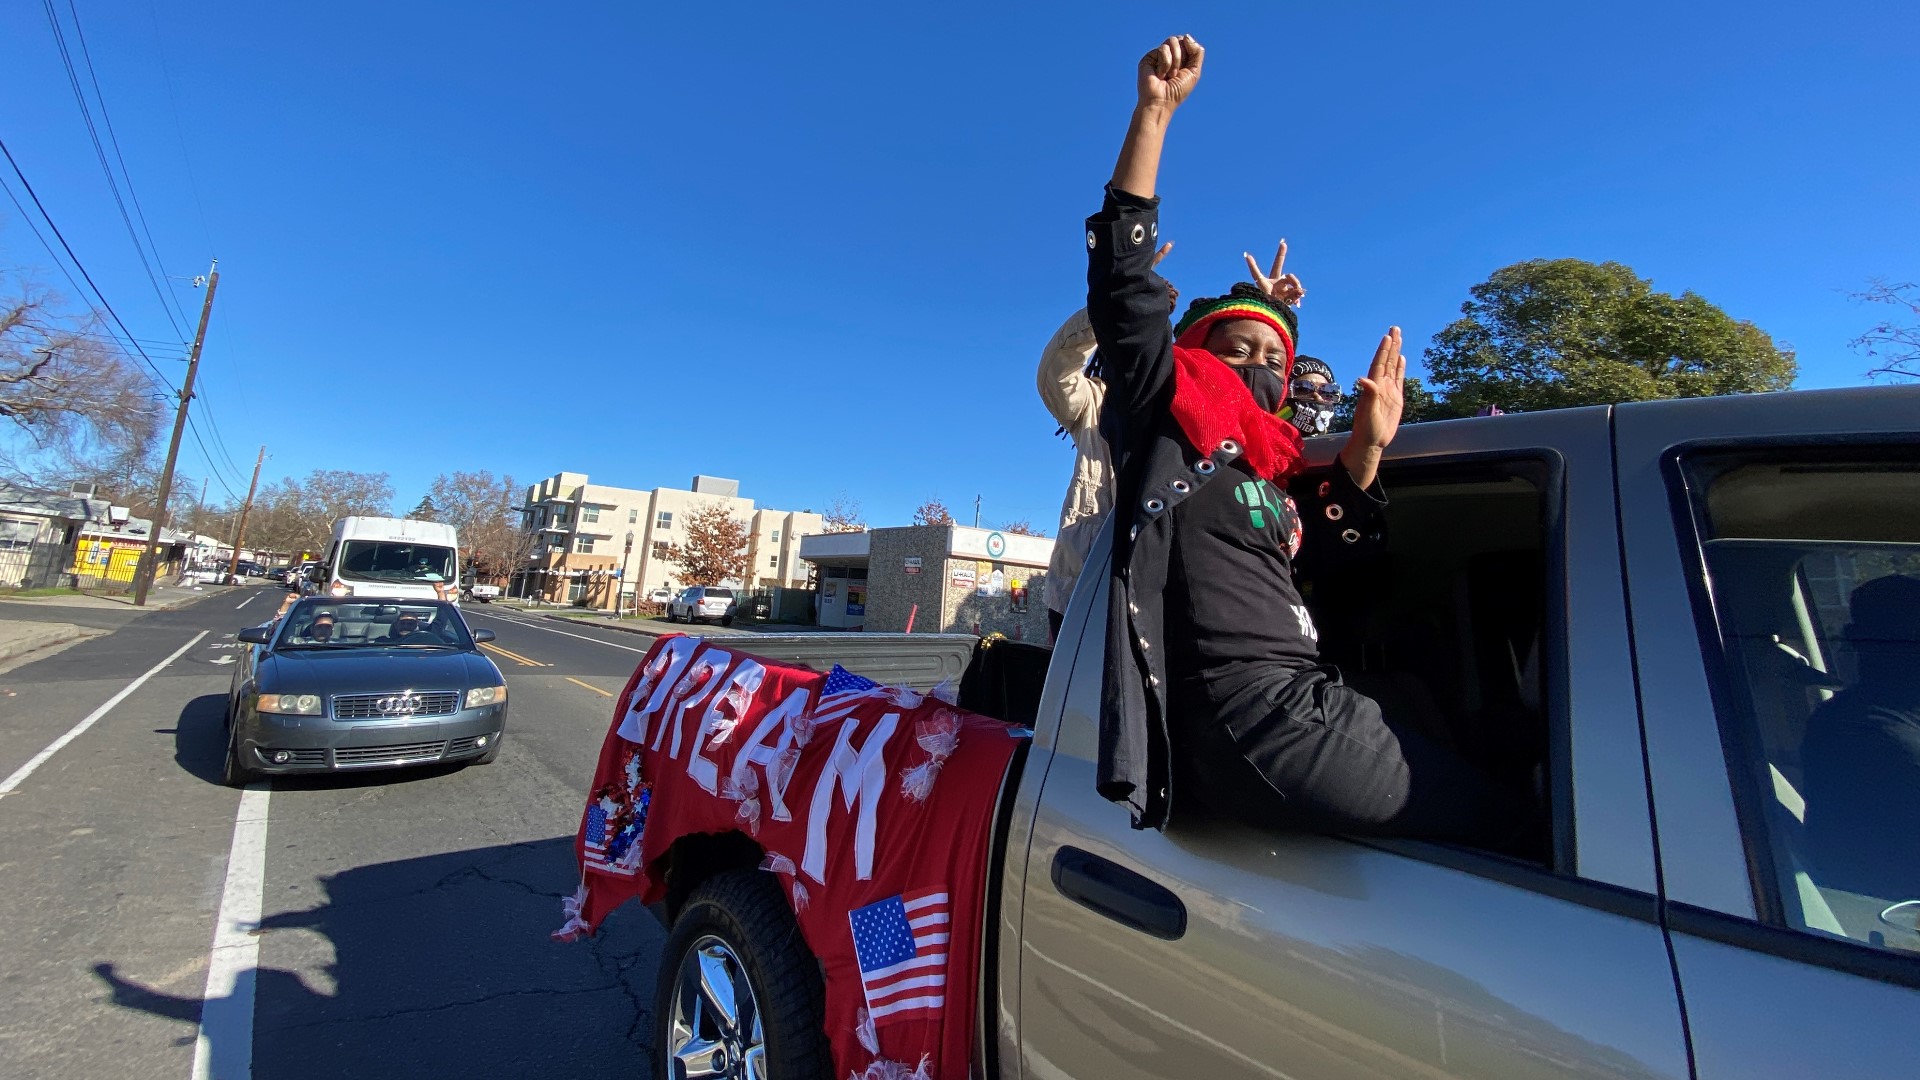 The MLK Jr. Day caravan made its way through Del Paso Heights, Meadowview, Oak Park and ended at Sacramento State University.